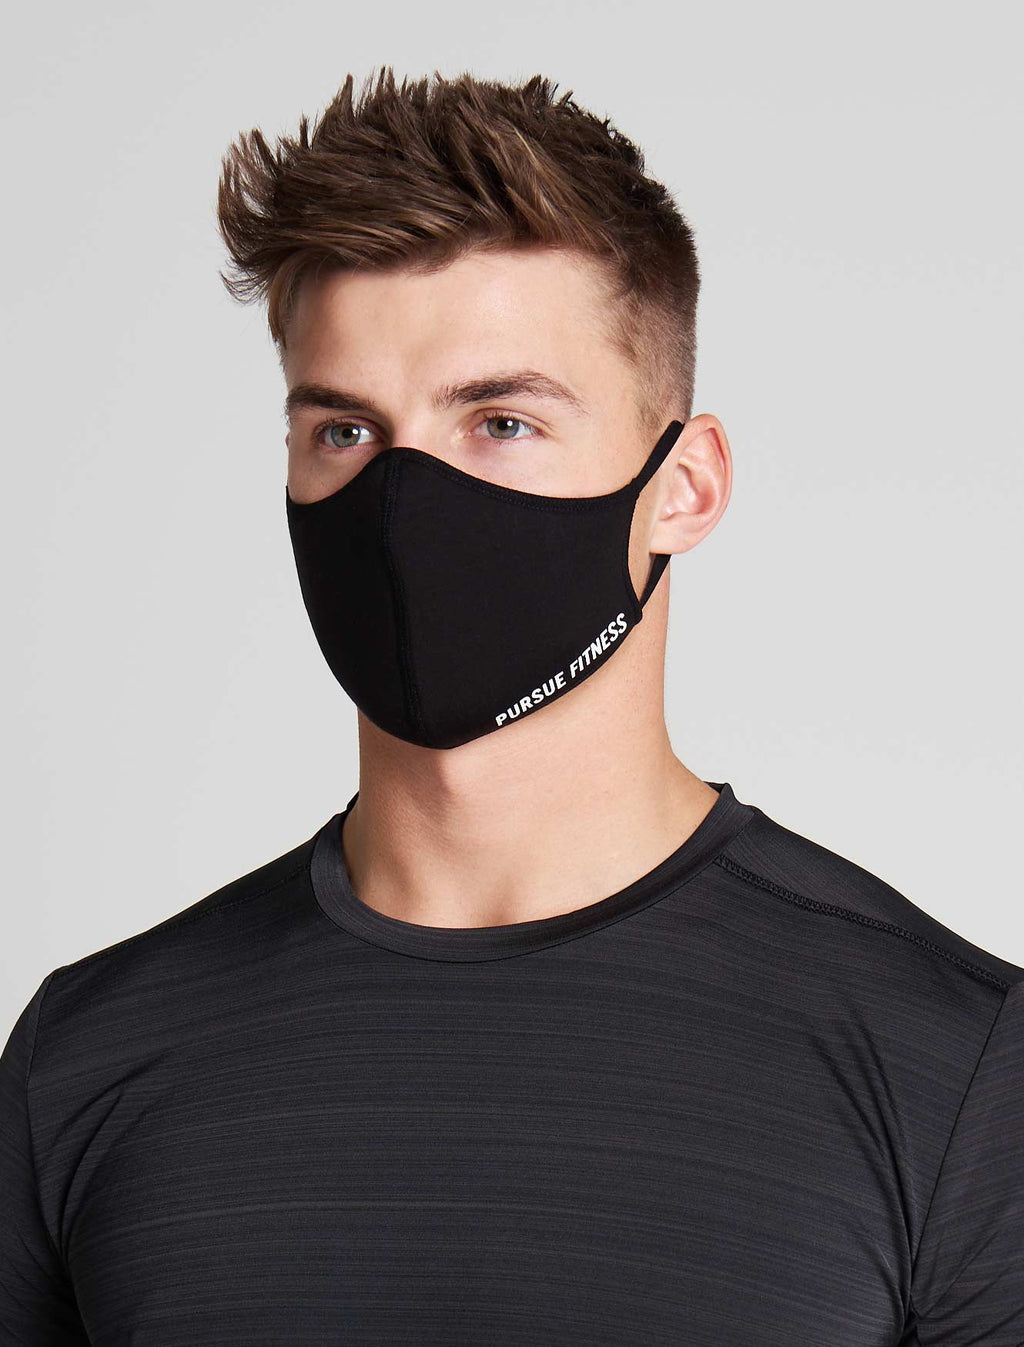 products/accessories-the-face-mask-black-unisex_c1513ce6-62a1-4347-8410-9ff61d56125d.jpg